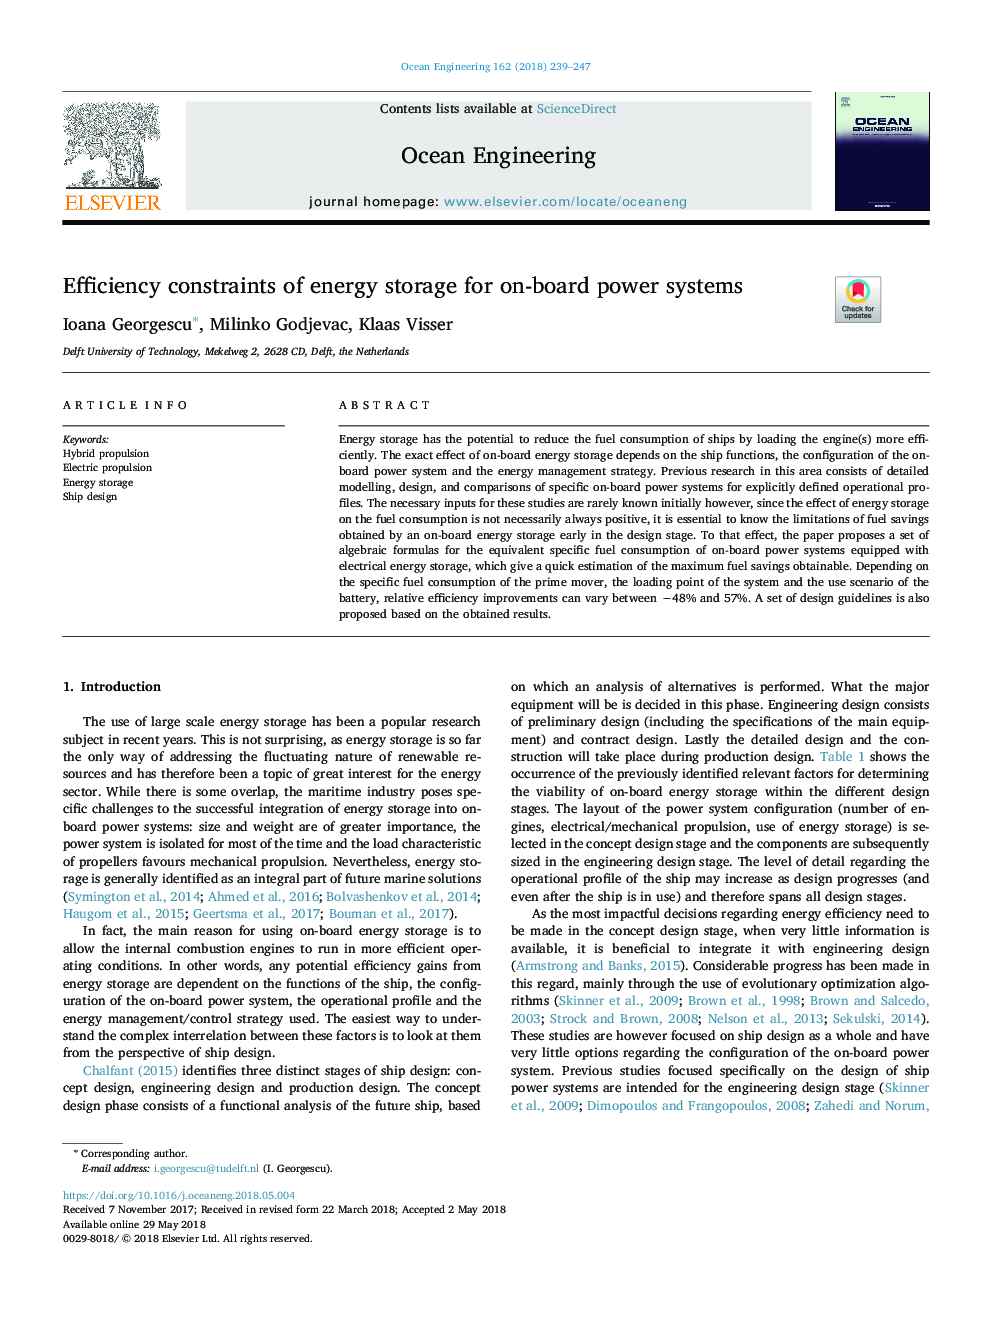 Efficiency constraints of energy storage for on-board power systems